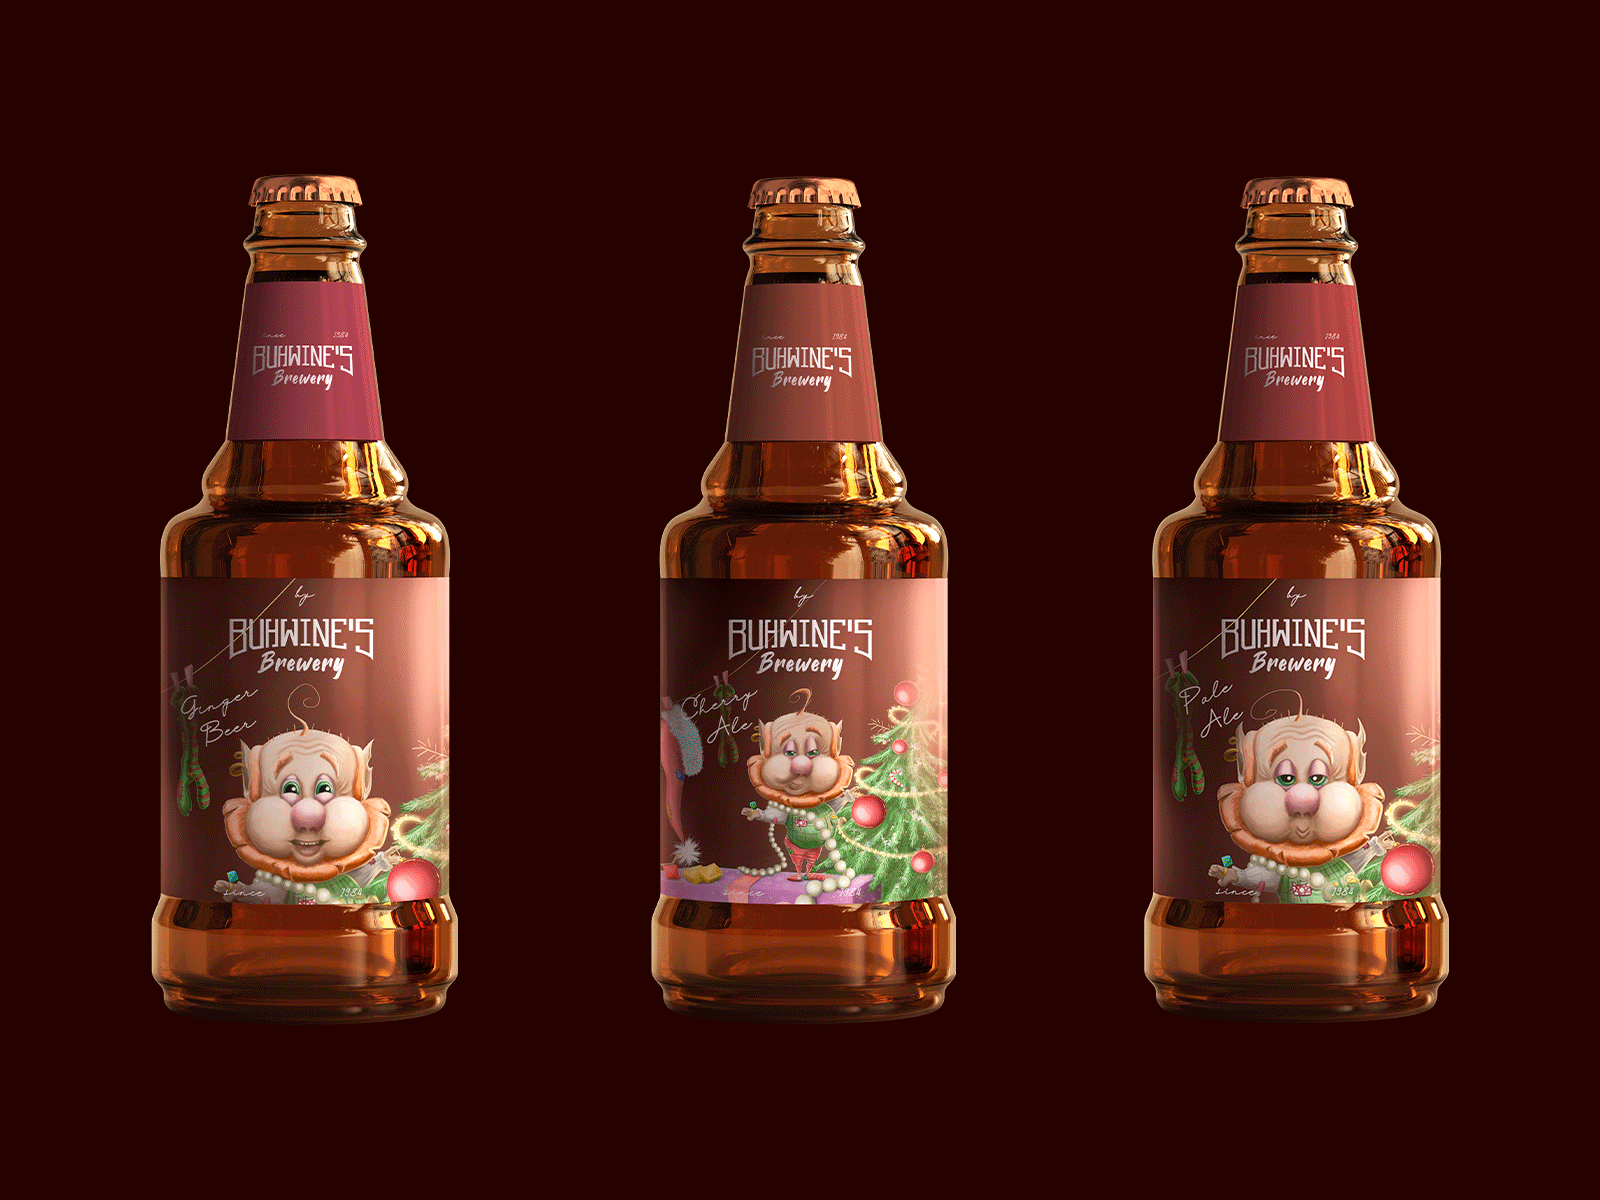 BUHWINE'S BREWERY. Beer label concept. Packaging.